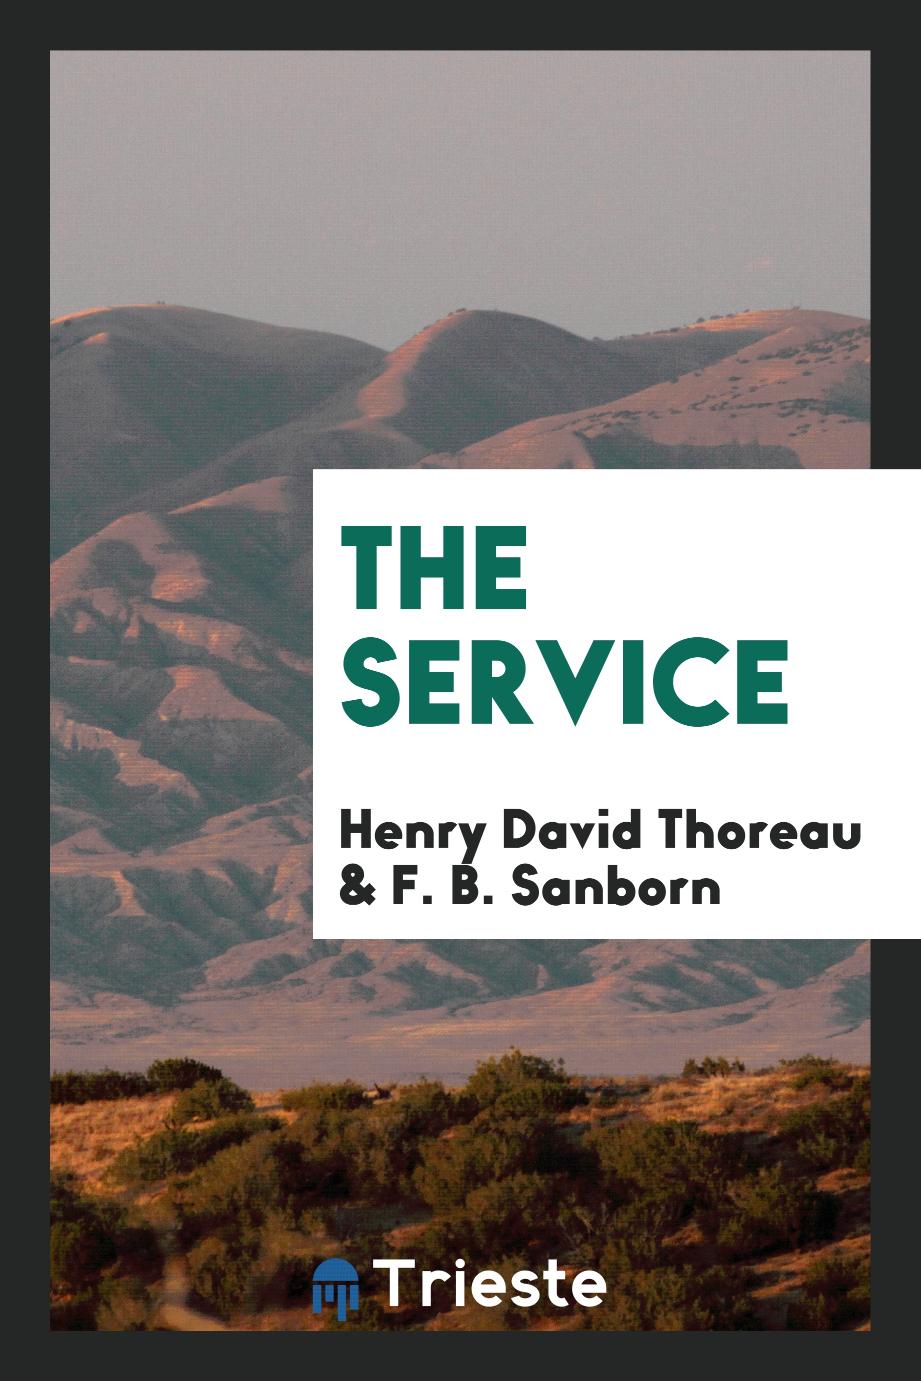 The service